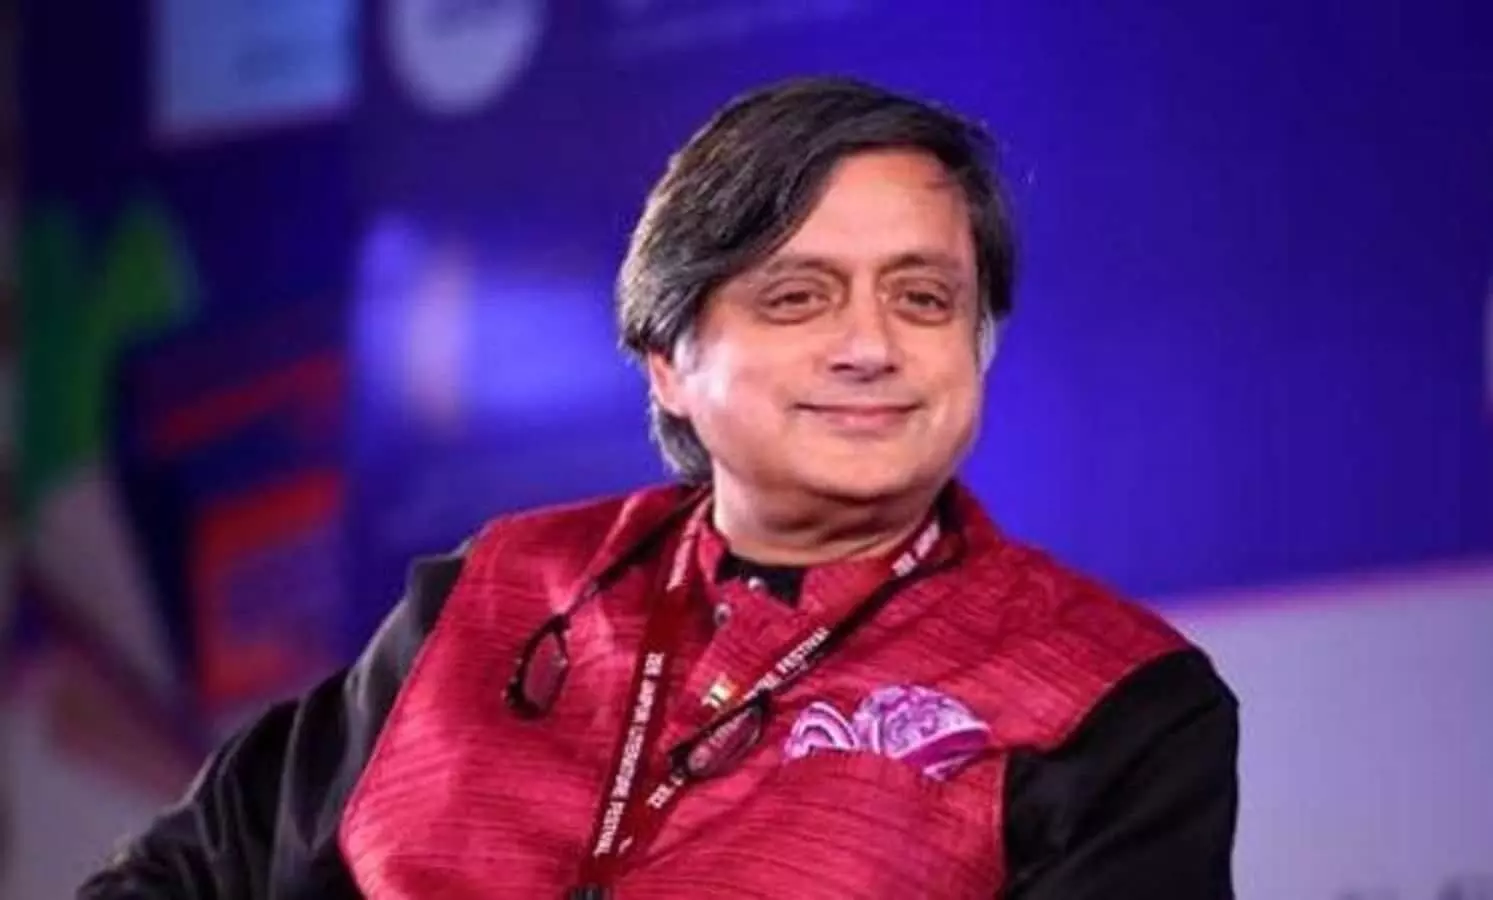 Shah, Gul and Kappan must be released to preserve press freedom, Tharoor demands in the LS